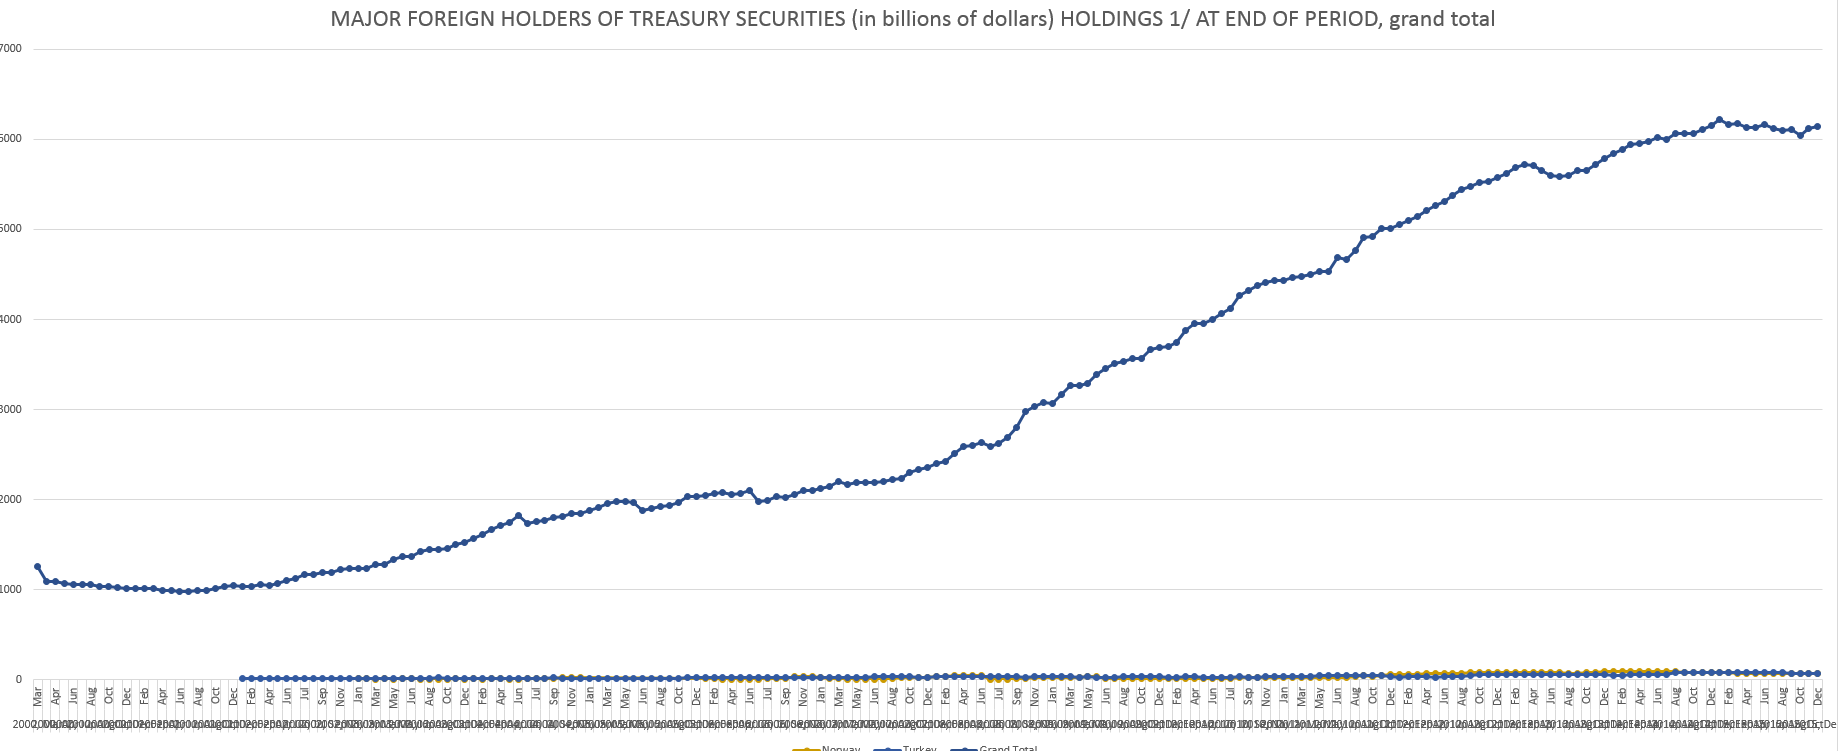 MAJOR FOREIGN HOLDERS OF TREASURY SECURITIES (in billions of dollars) HOLDINGS 1/ AT END OF PERIOD, grand total